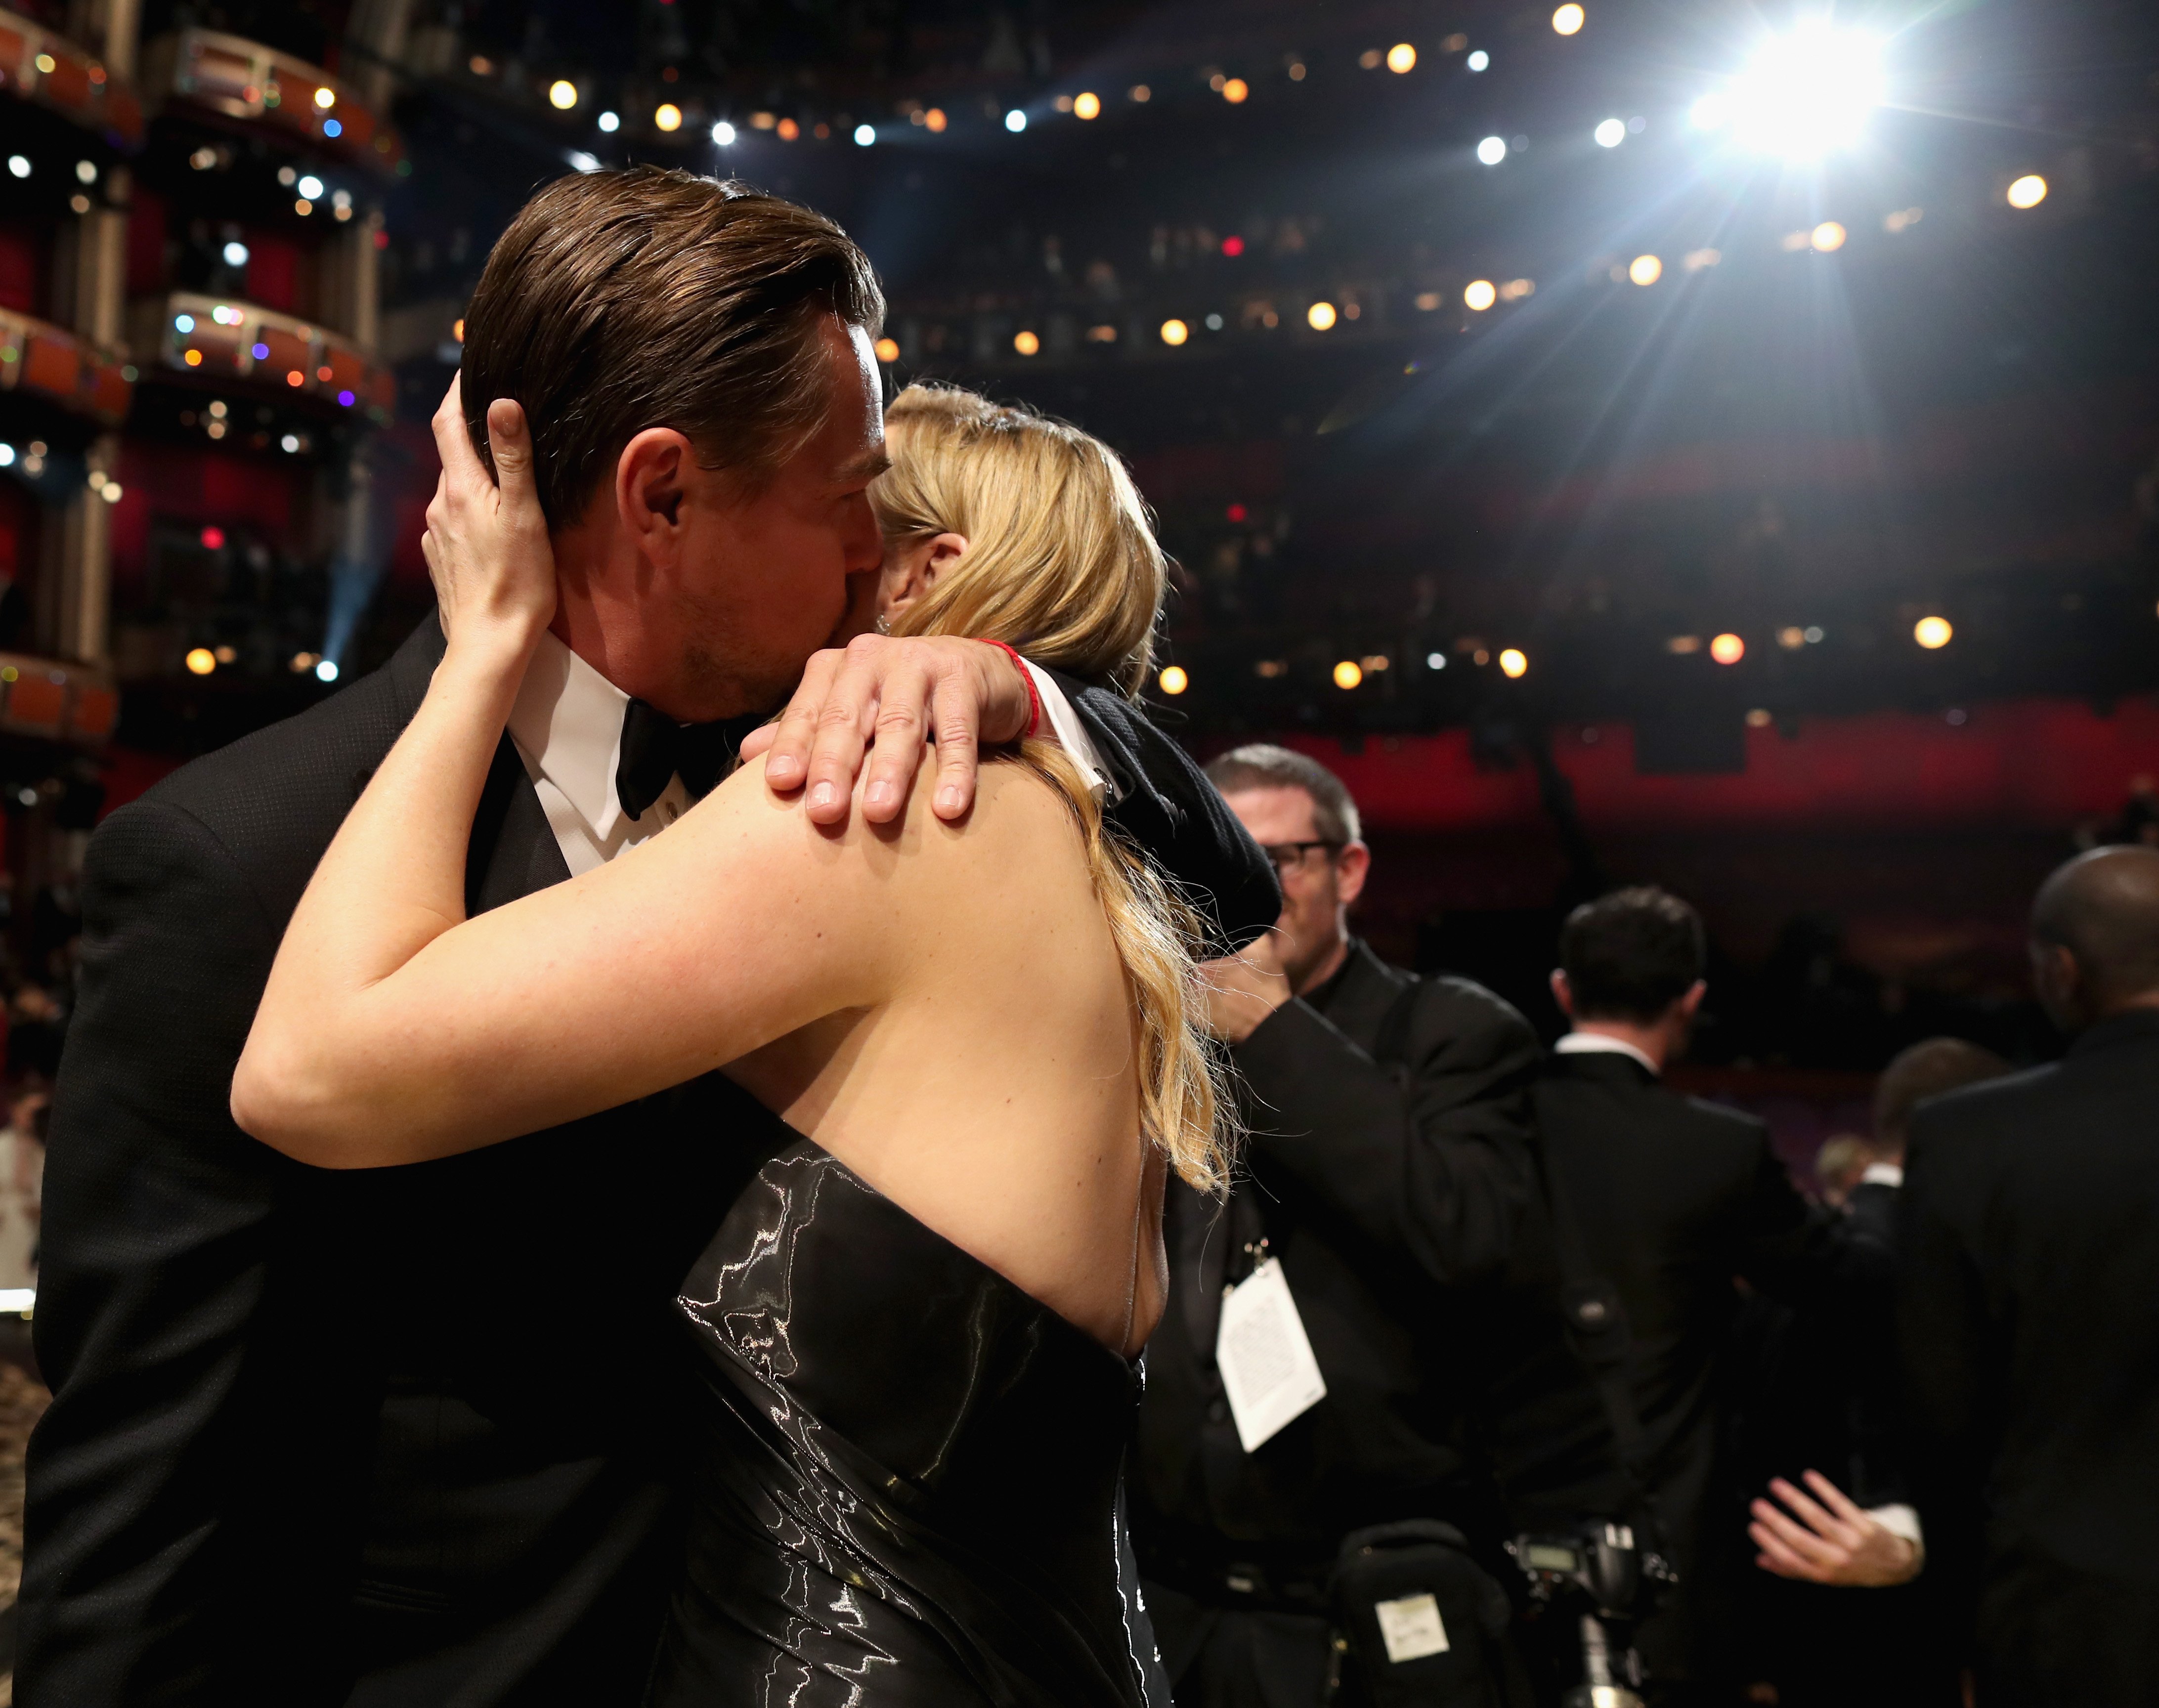 Leonardo DiCaprio and Kate Winslet share an embrace at the 88th Annual Academy Awards at Dolby Theatre on February 28, 2016 in Hollywood, California | Source: Getty Images